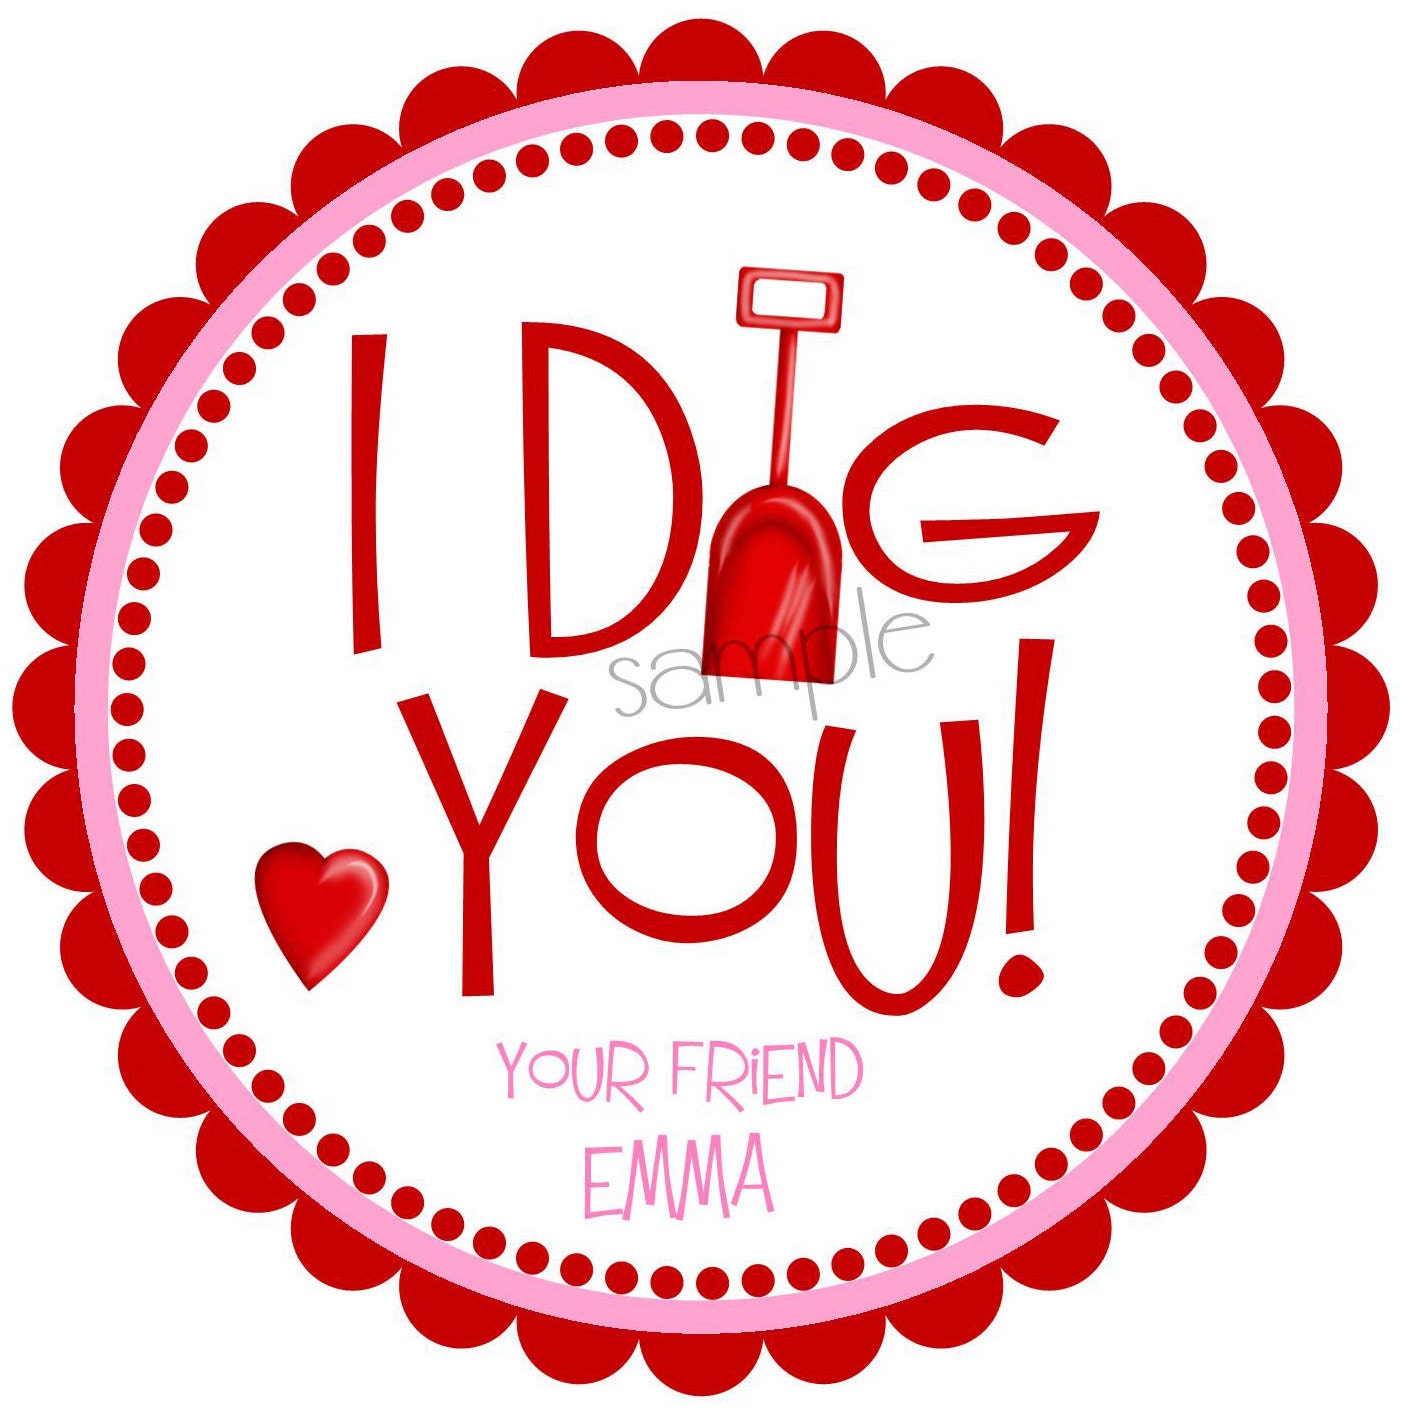 Valentines day Stickers I Dig You boys by LittlebeaneBoutique